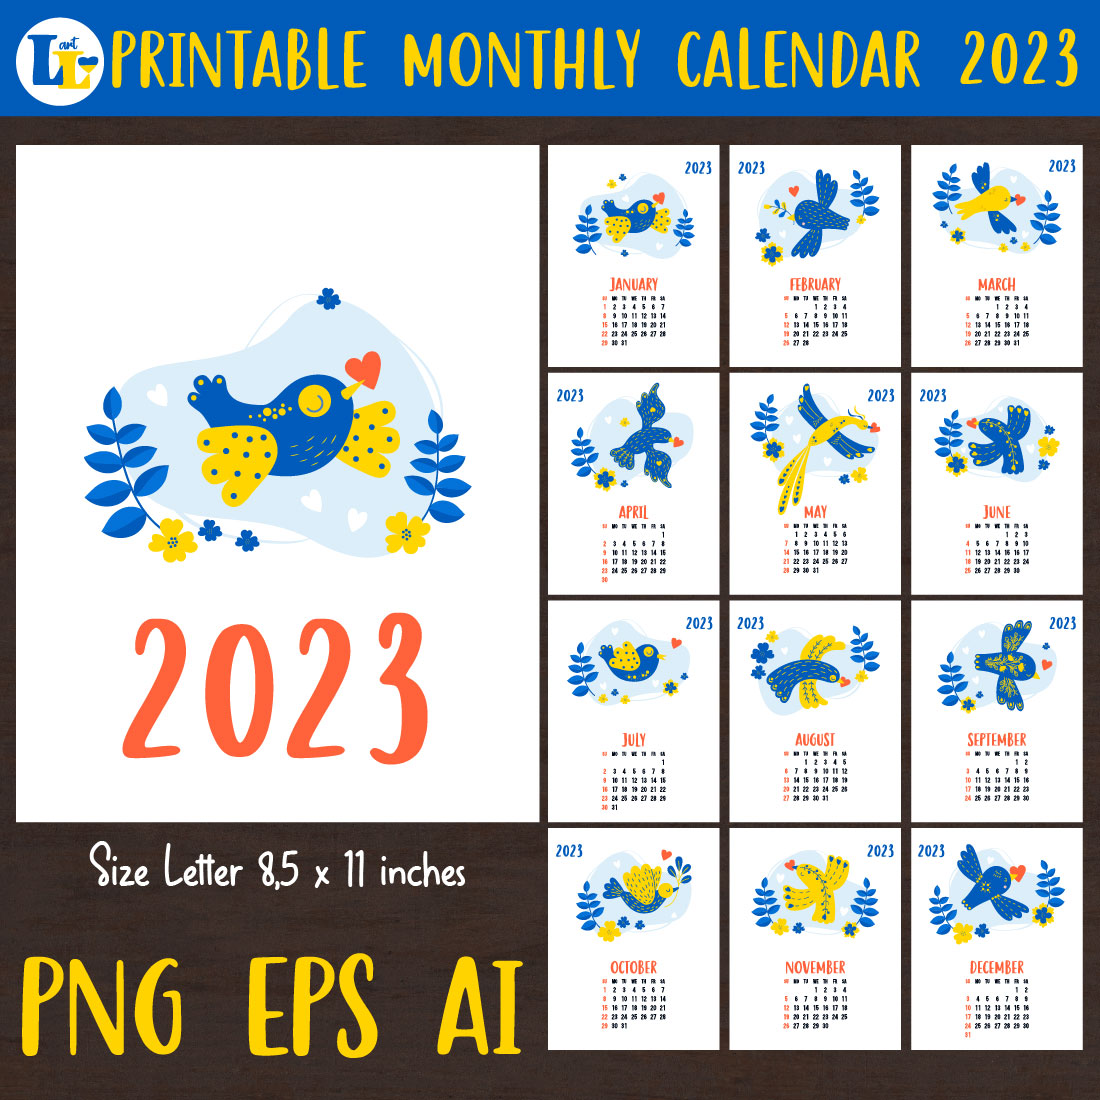 Calendar 2023 Printable Monthly Template Birds Luck cover image.